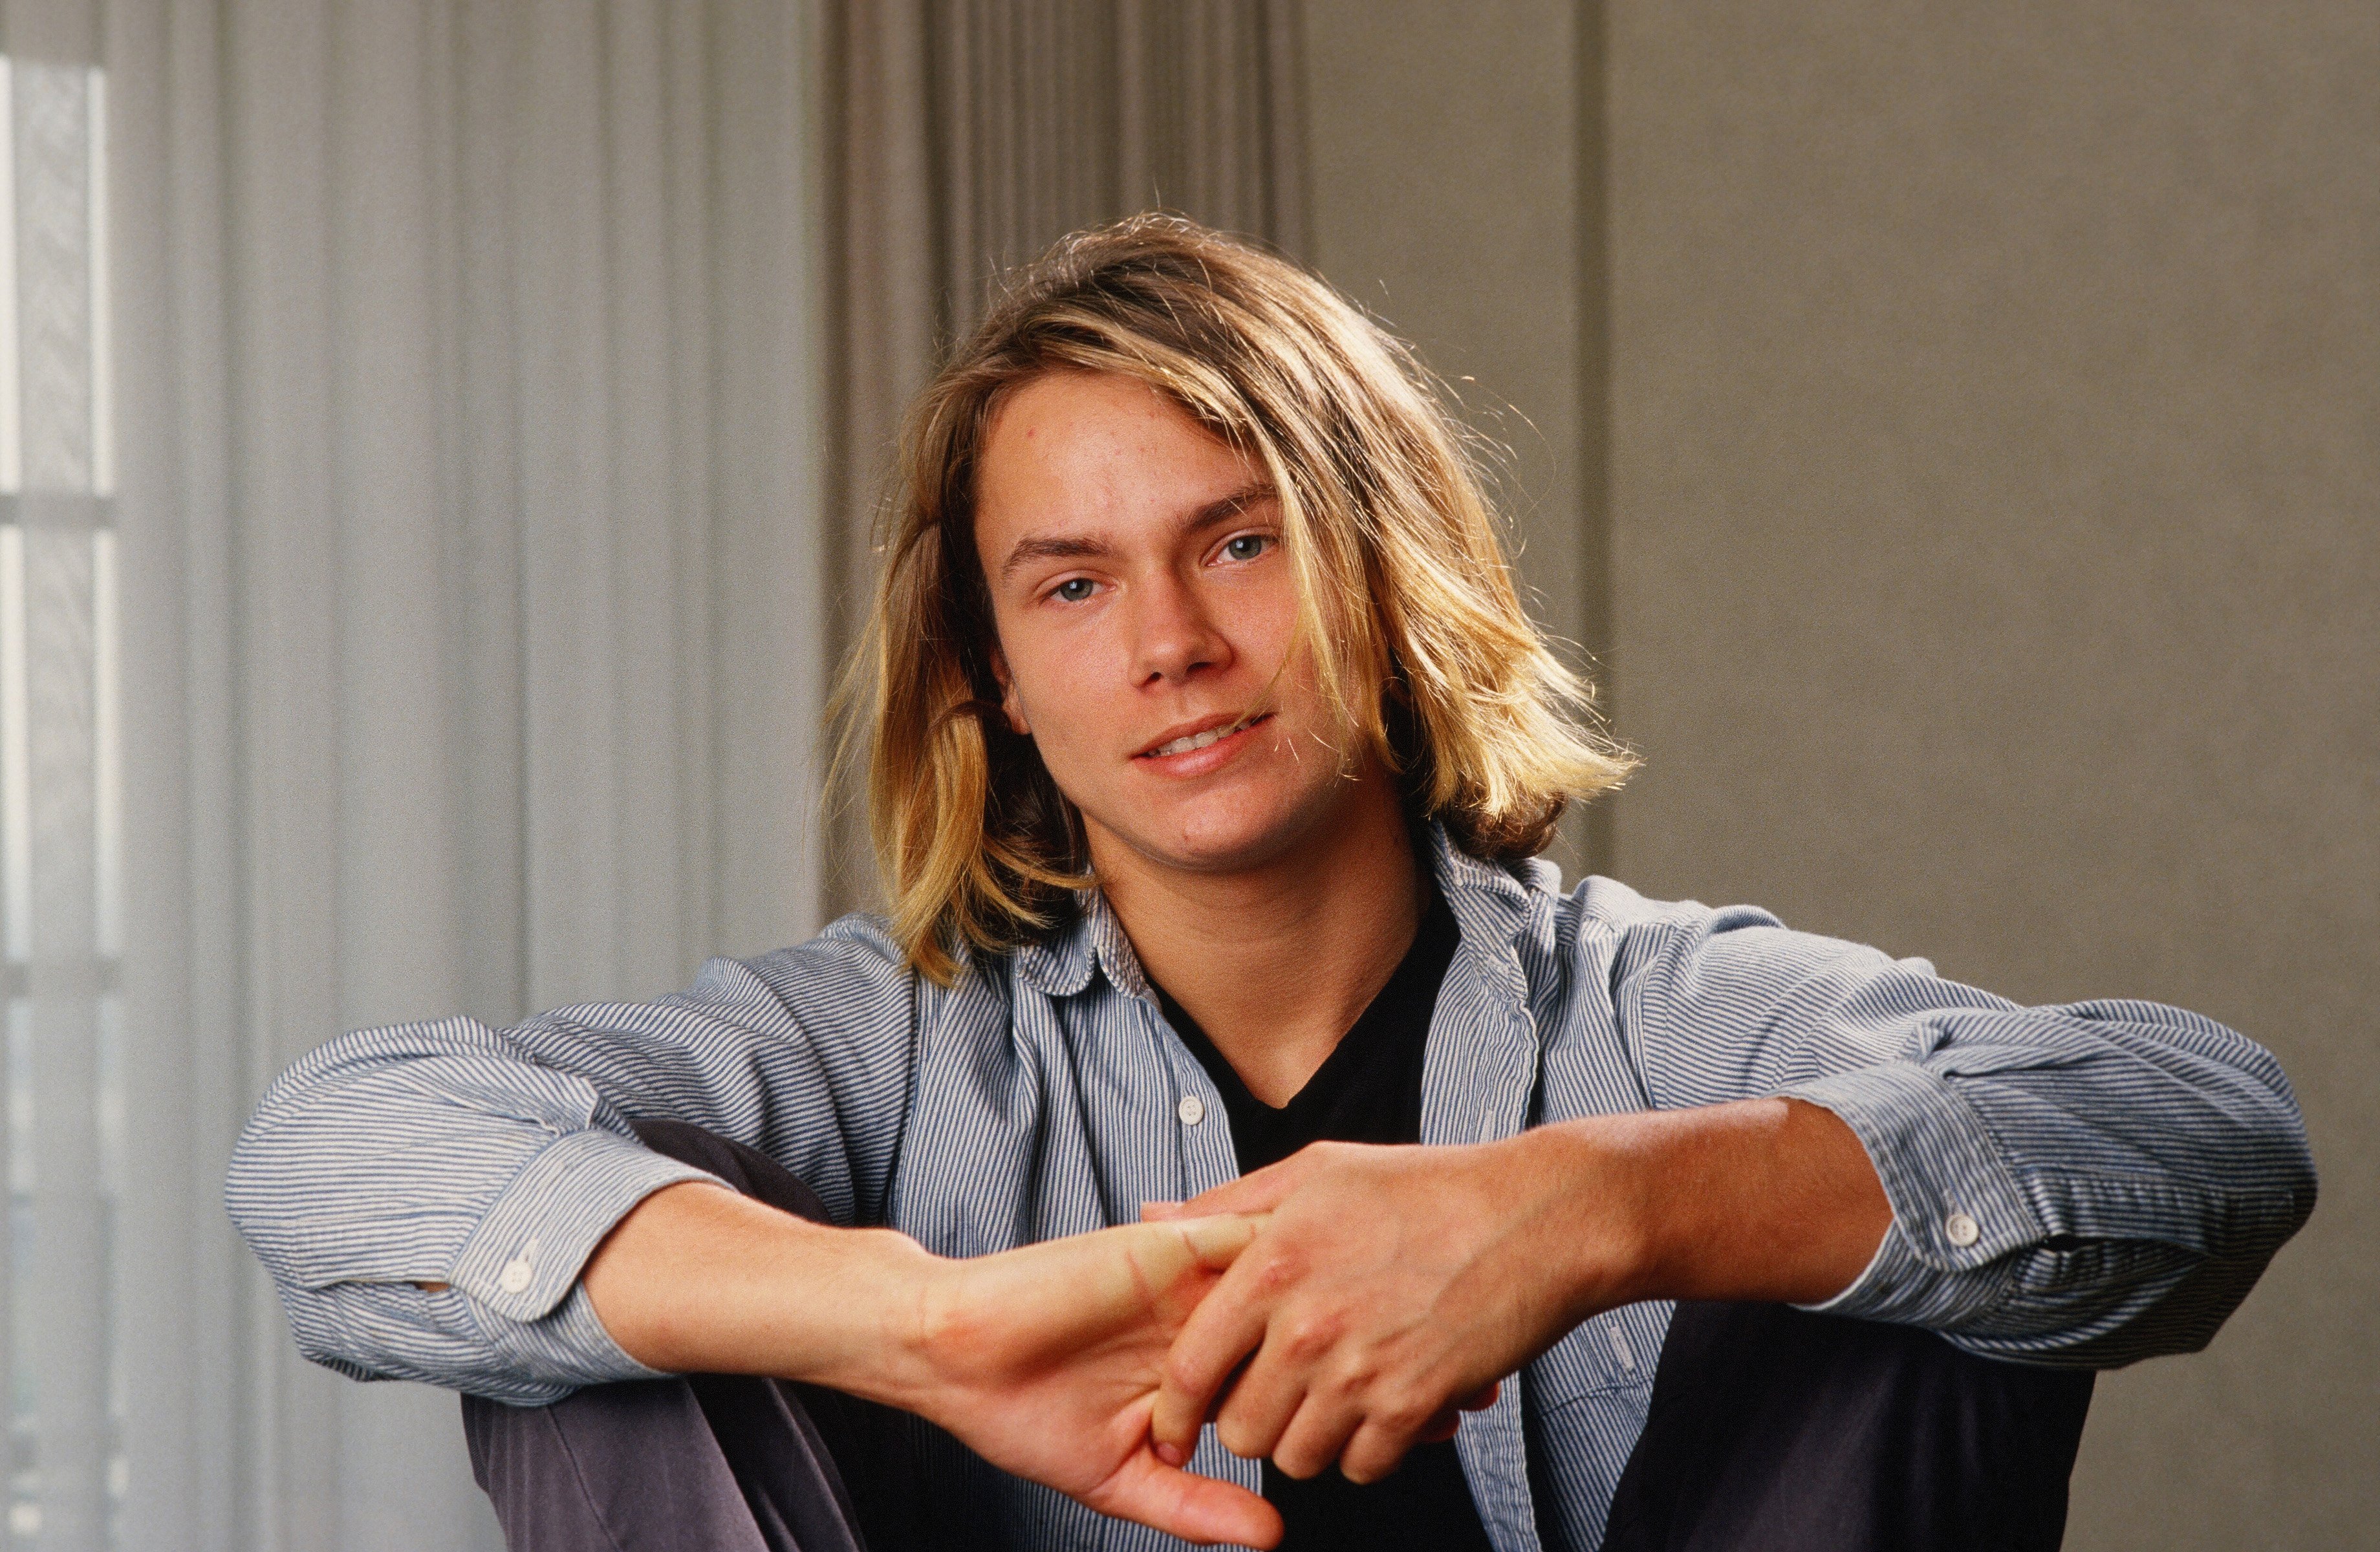 River Phoenix in 1988 in Los Angeles, California | Photo: Getty Images